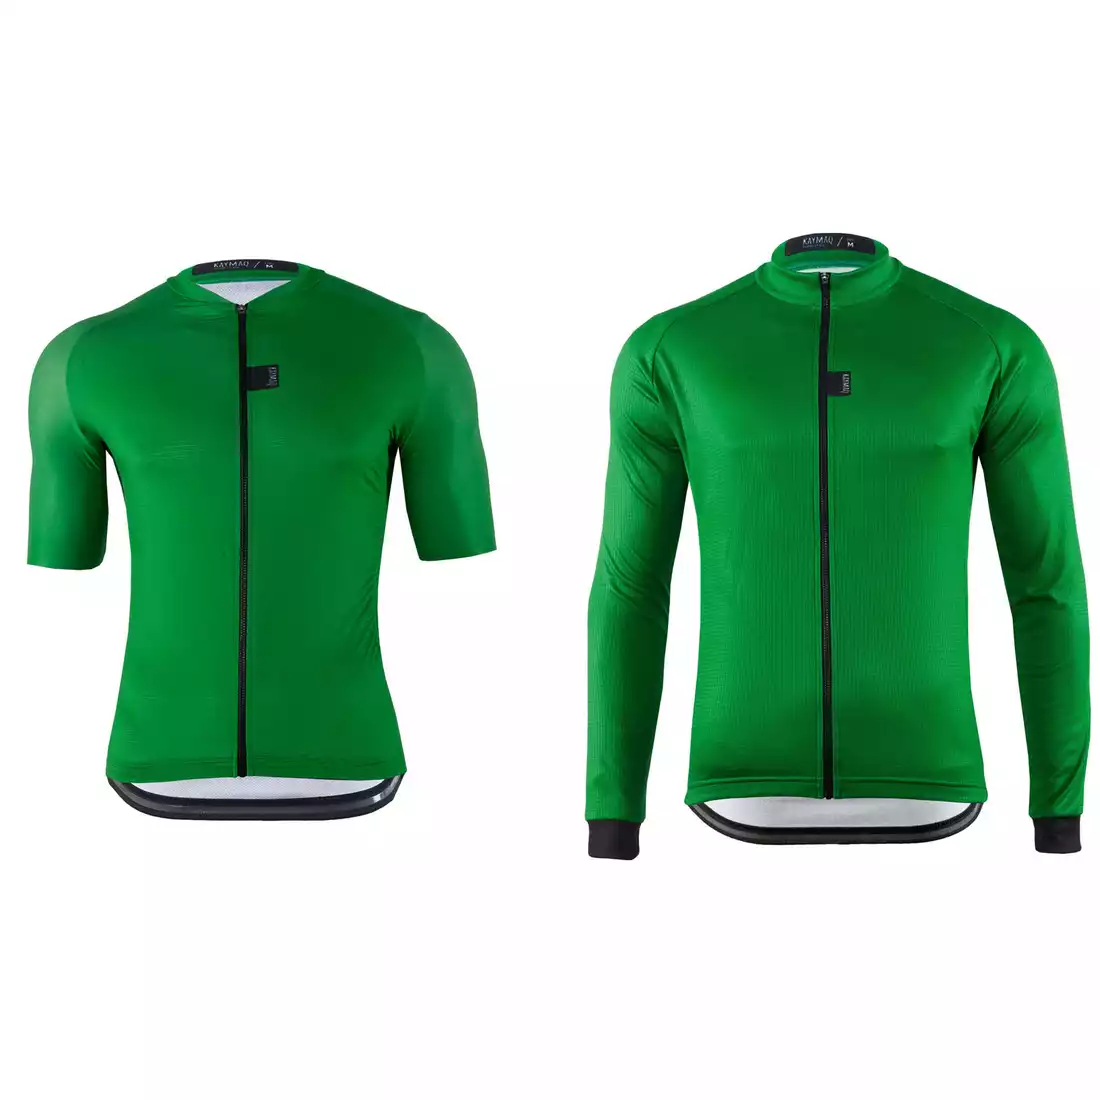 Mens Sports Team Cycling Jersey Set Bike Bicycle Top Long Sleeve Clothing Pocket 